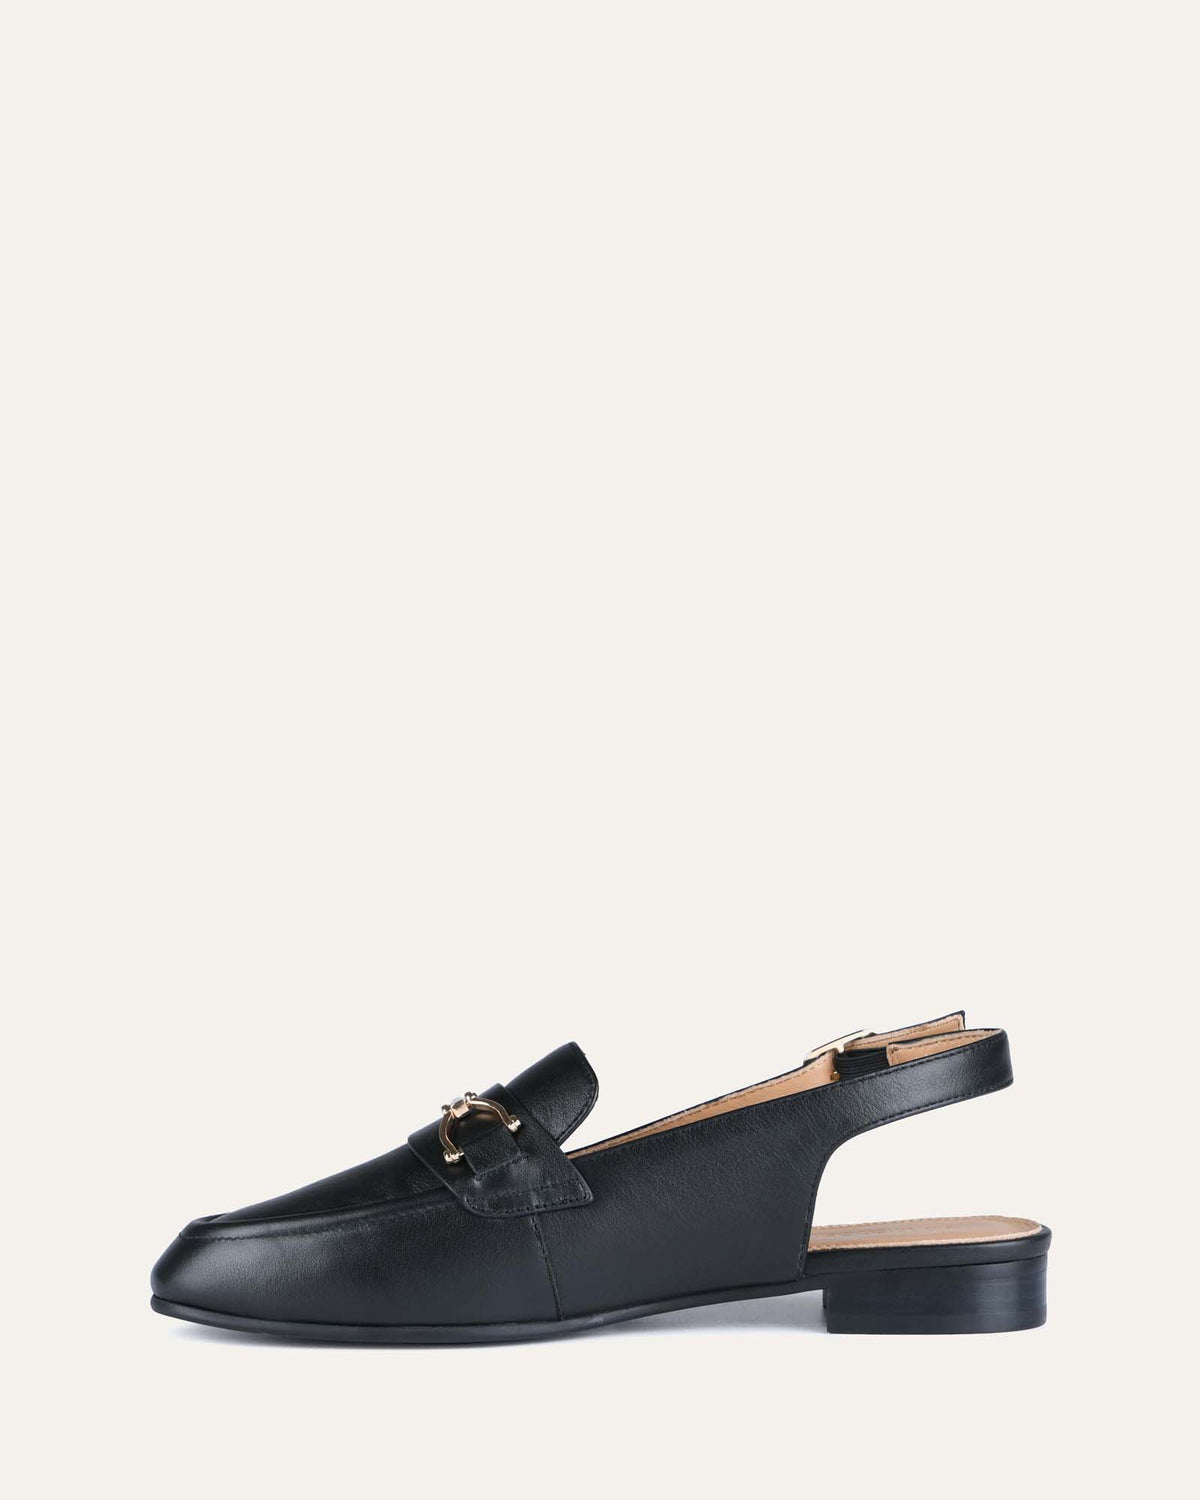 DIXIE CASUAL FLATS BLACK LEATHER